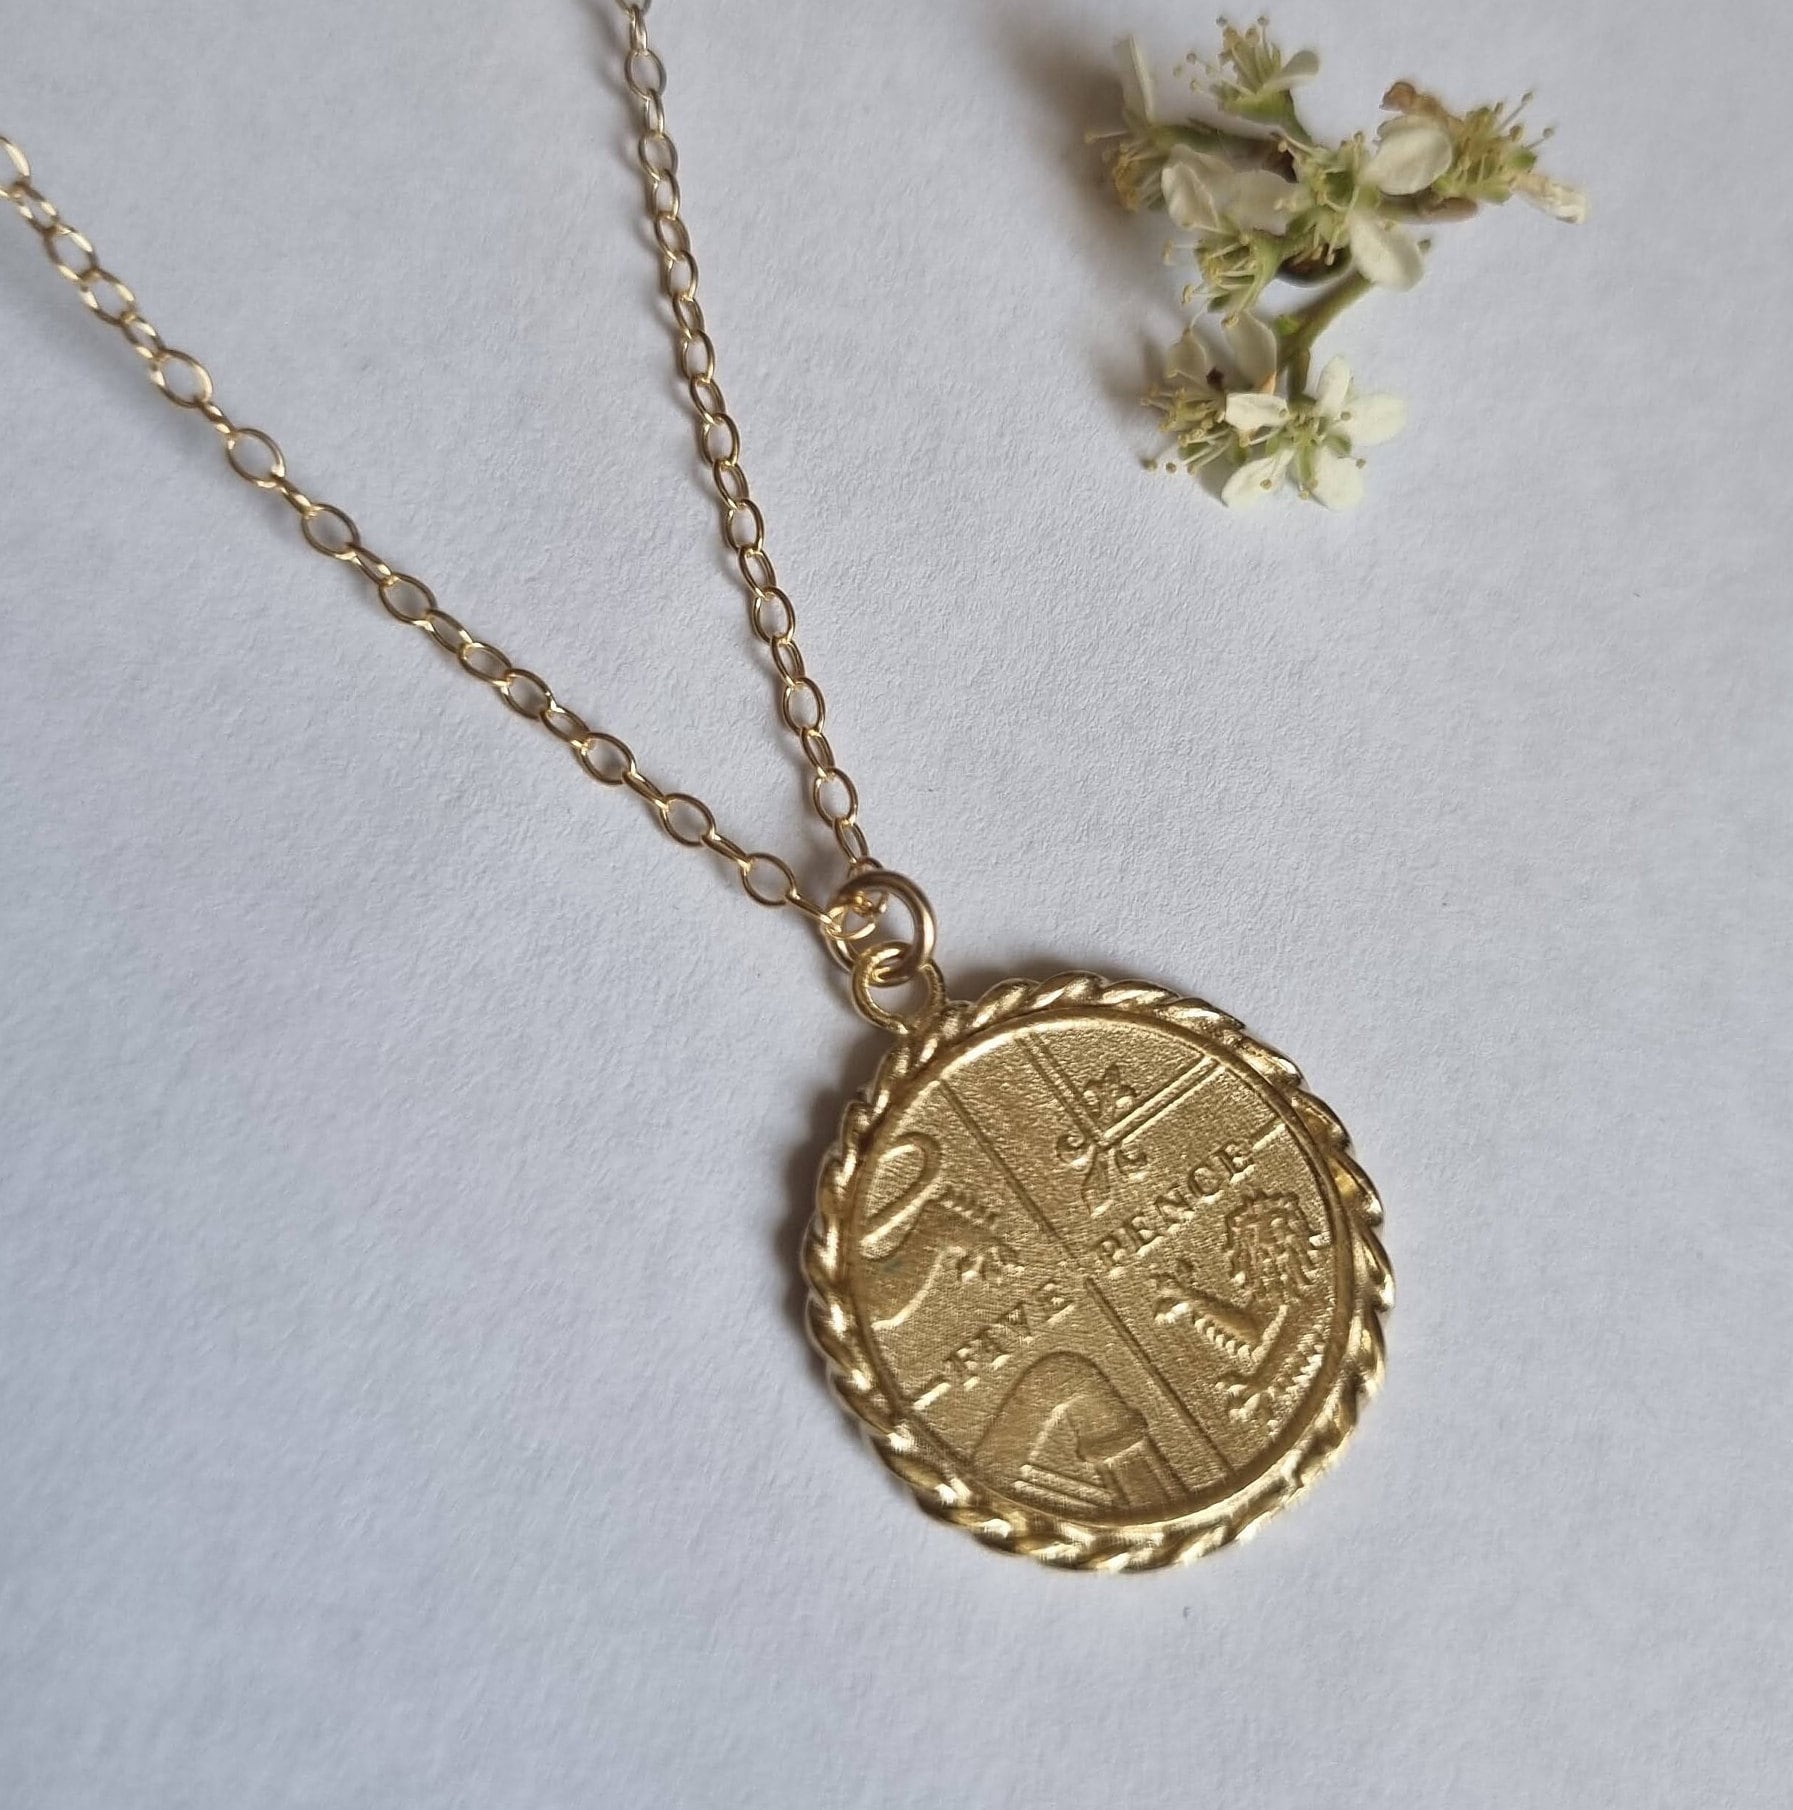 Buy Constantine Coin Pendant / 9k or 14k Solid Gold Byzantine Cross Necklace  / Greek Protection Charm Online in India - Etsy